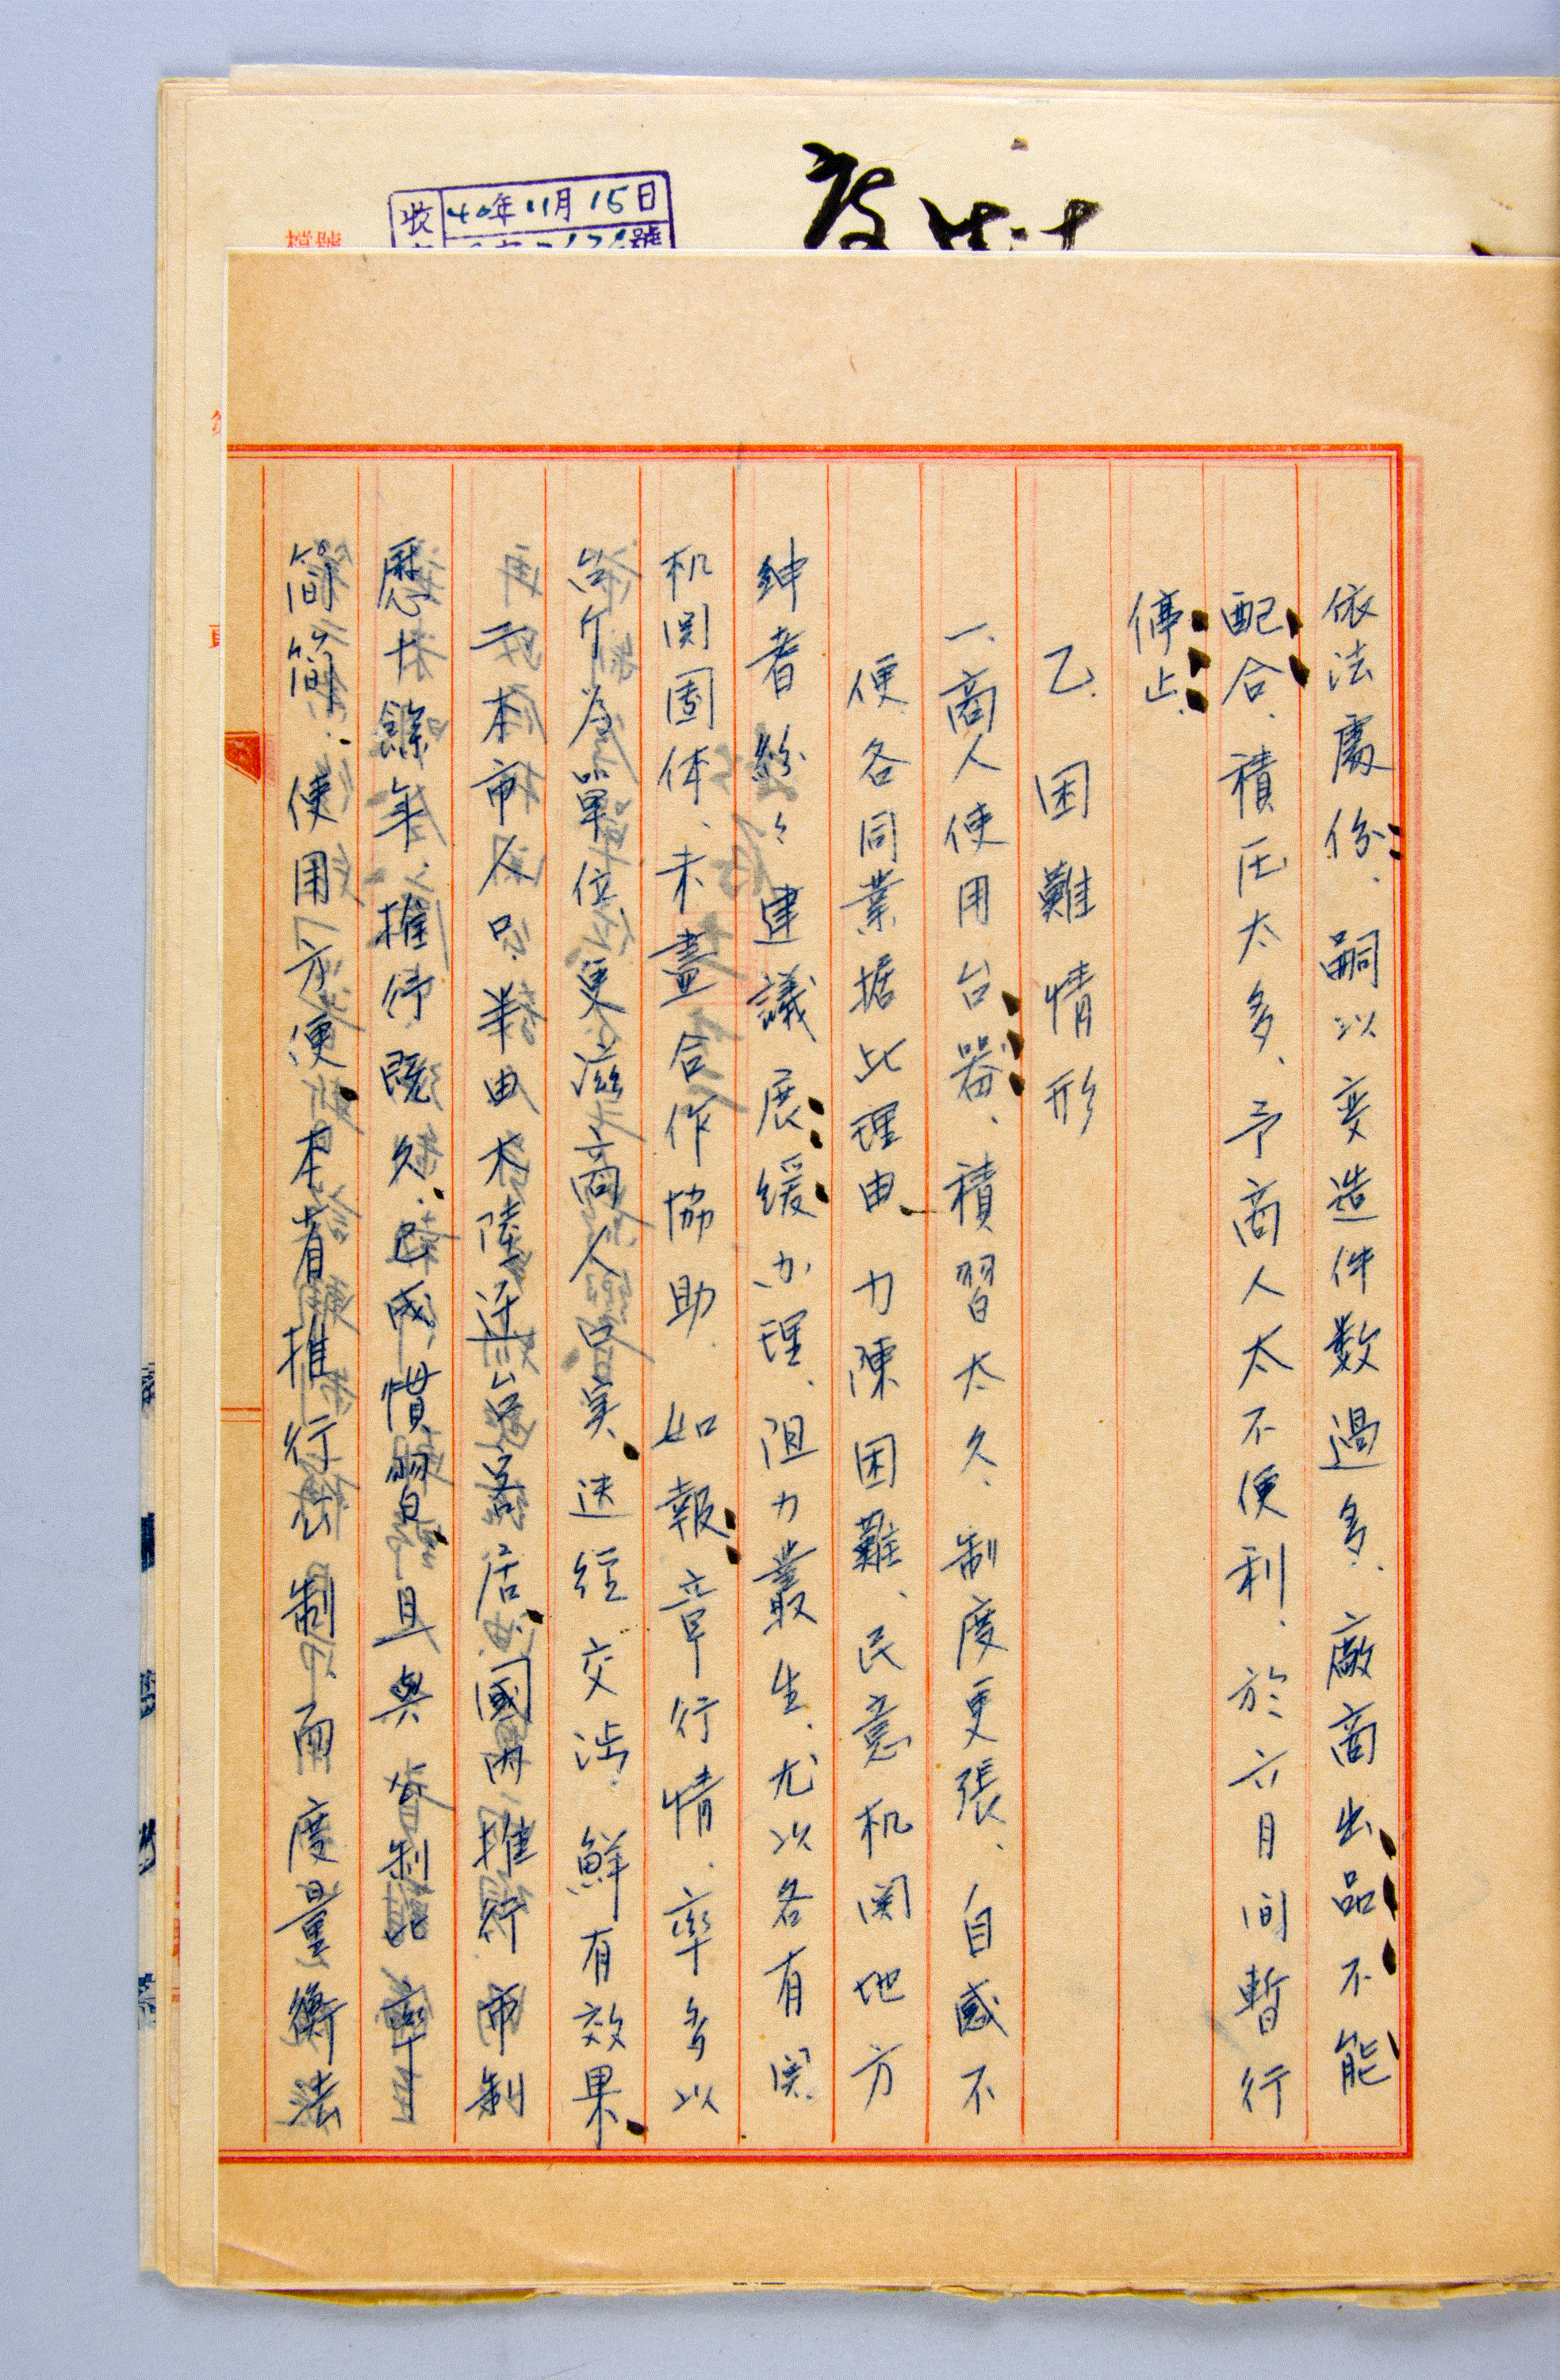 The report of the Hualien County Government's on metrological administration in 1951